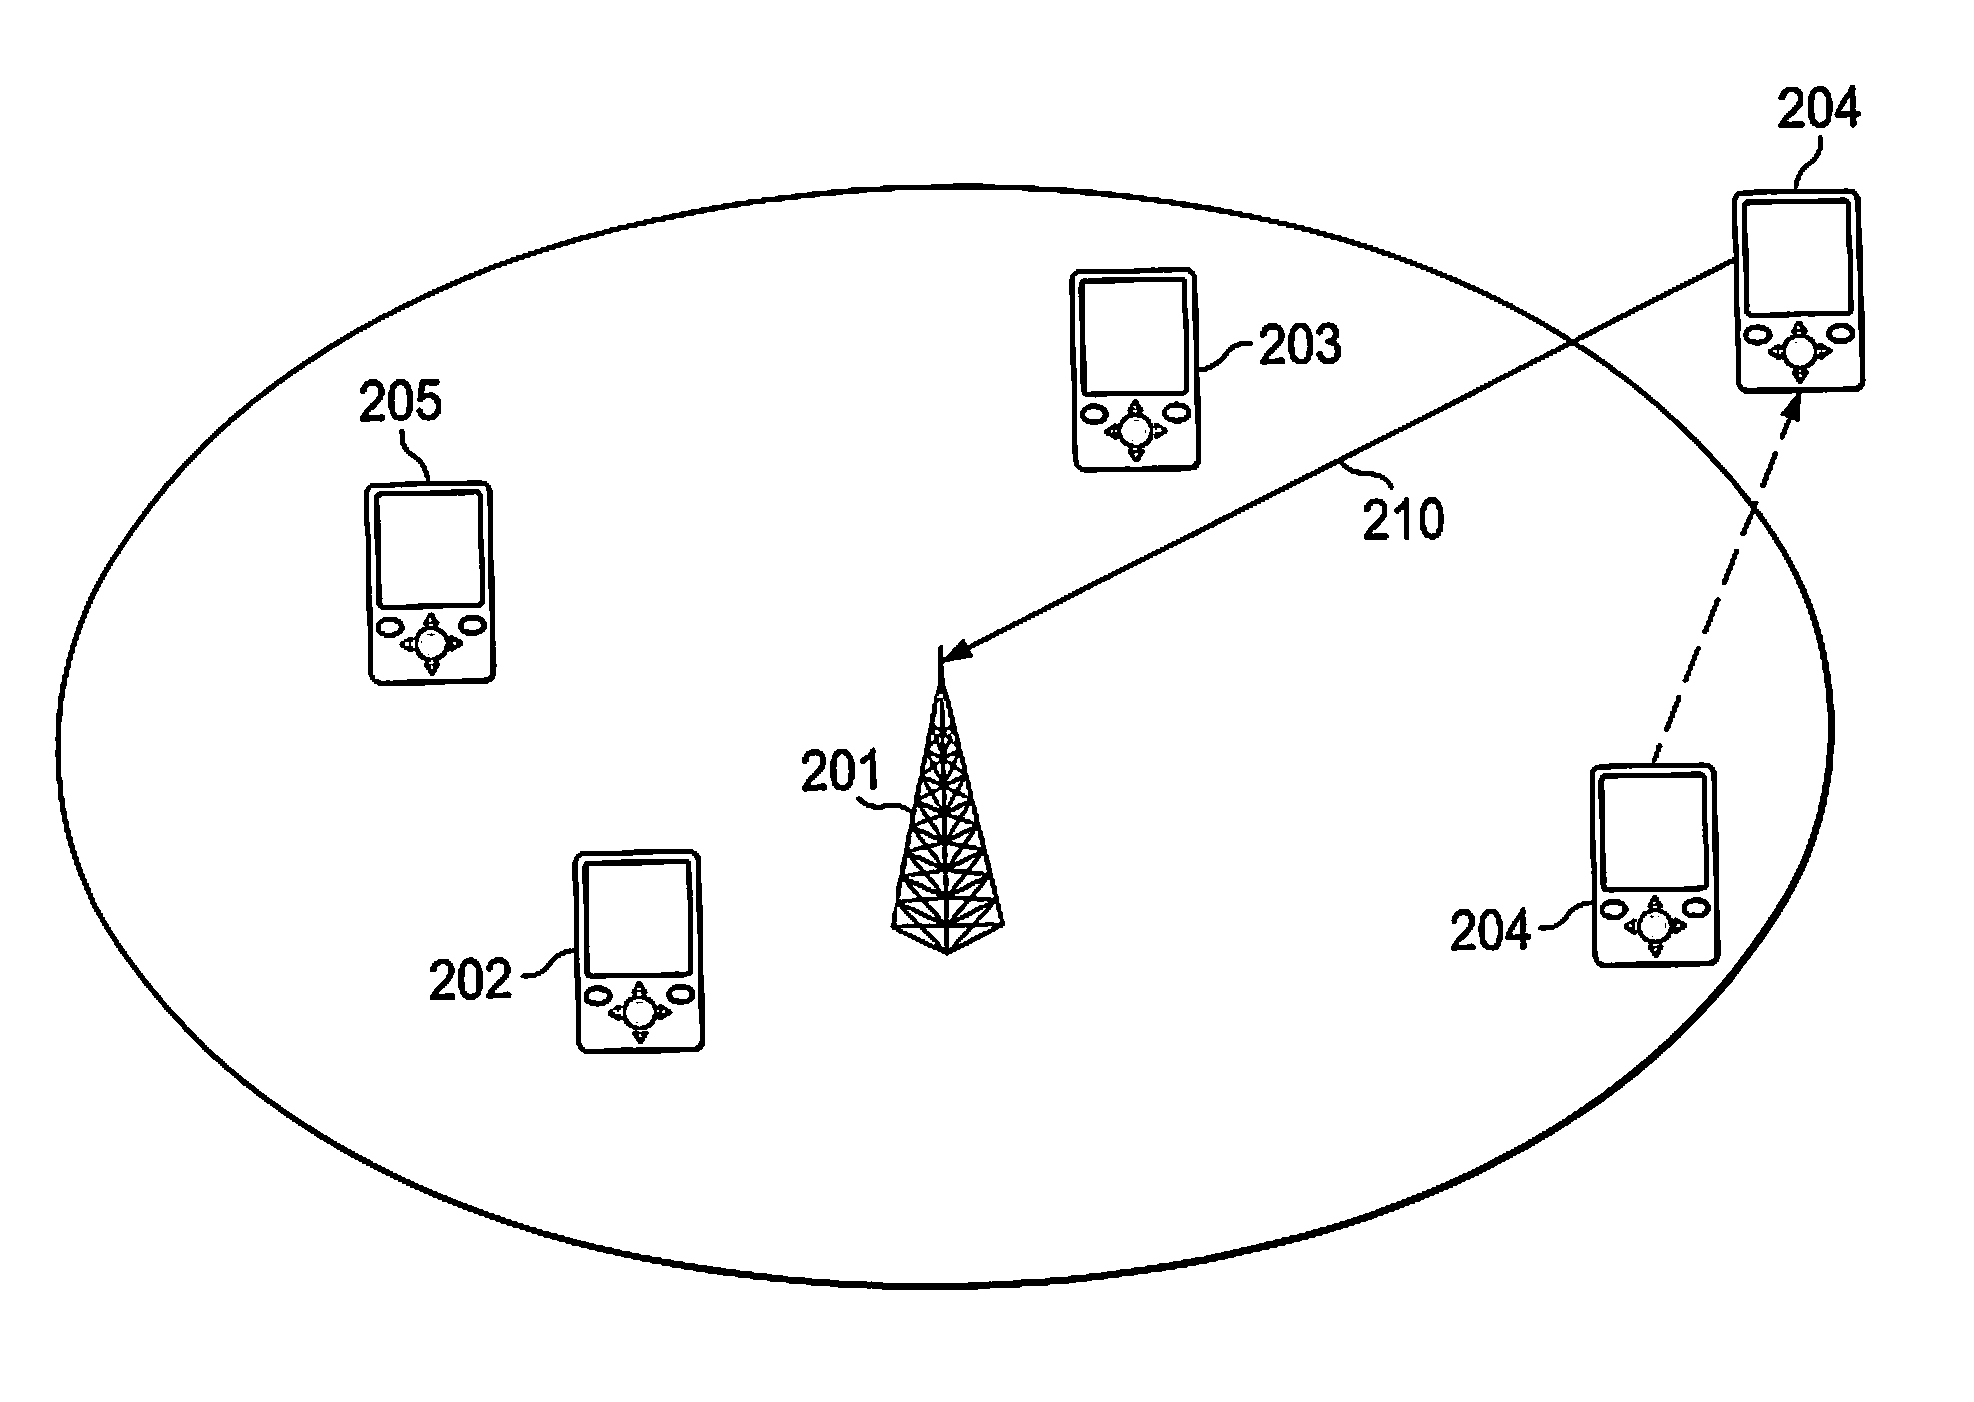 Power control in a communication network and method